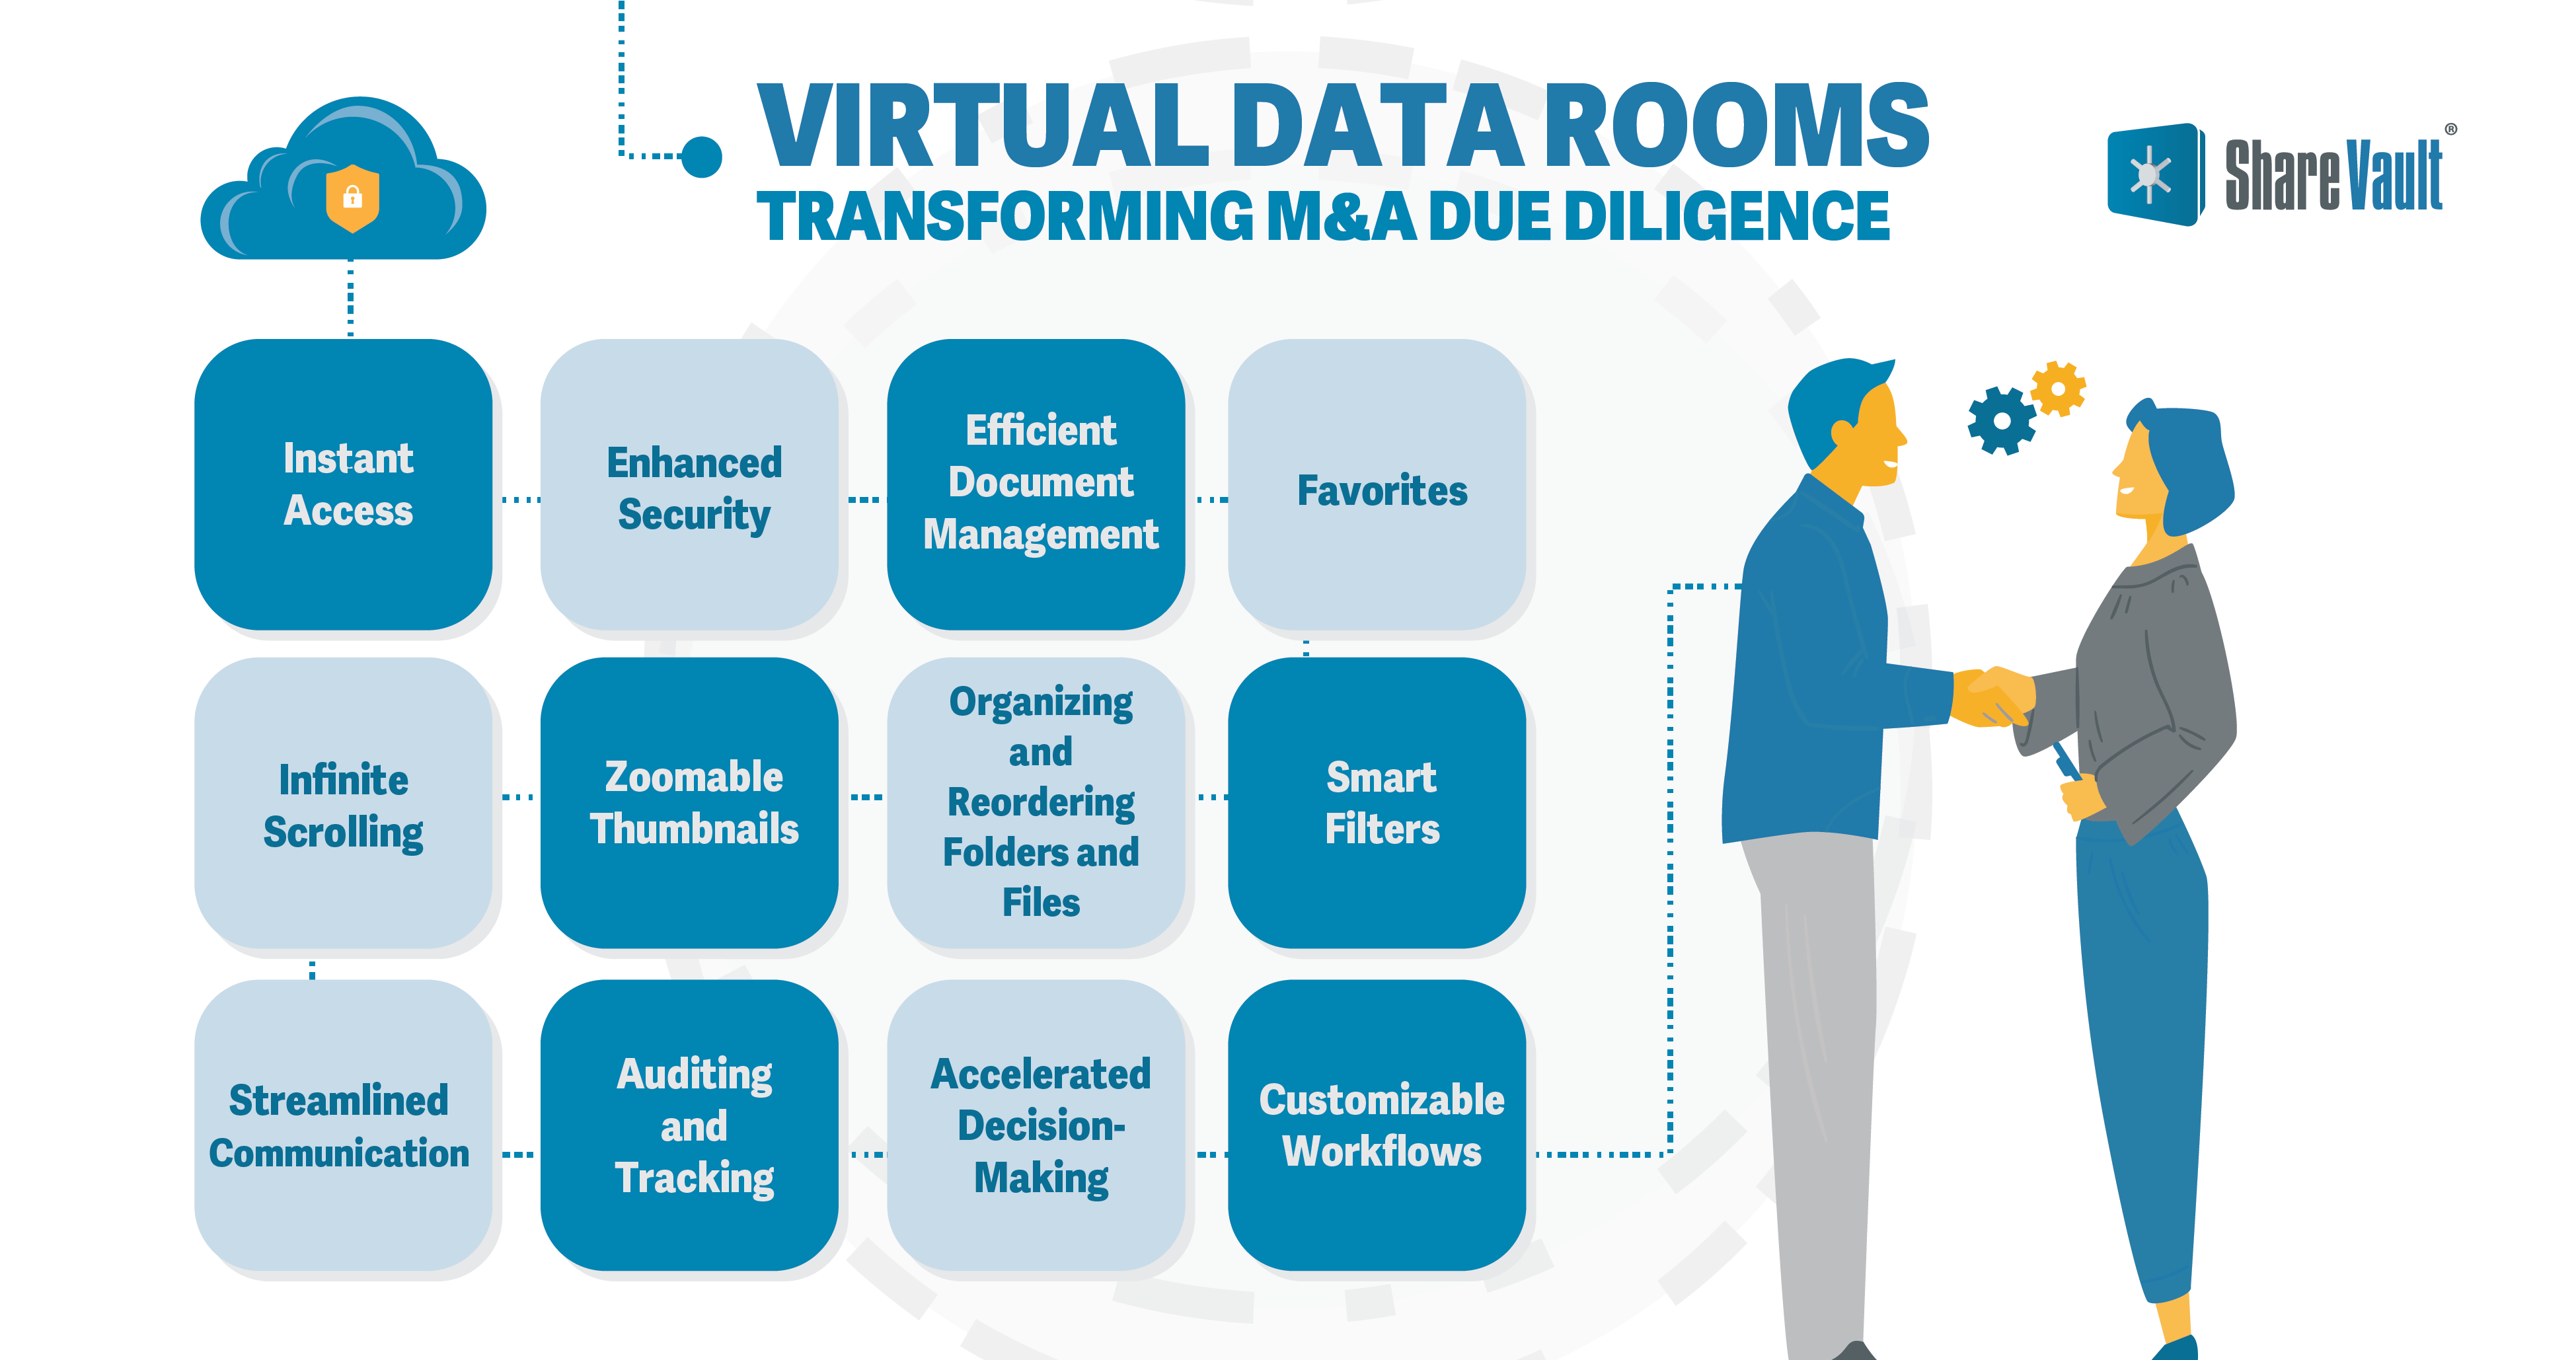 Virtual Data Rooms: Transforming M&A Due Diligence